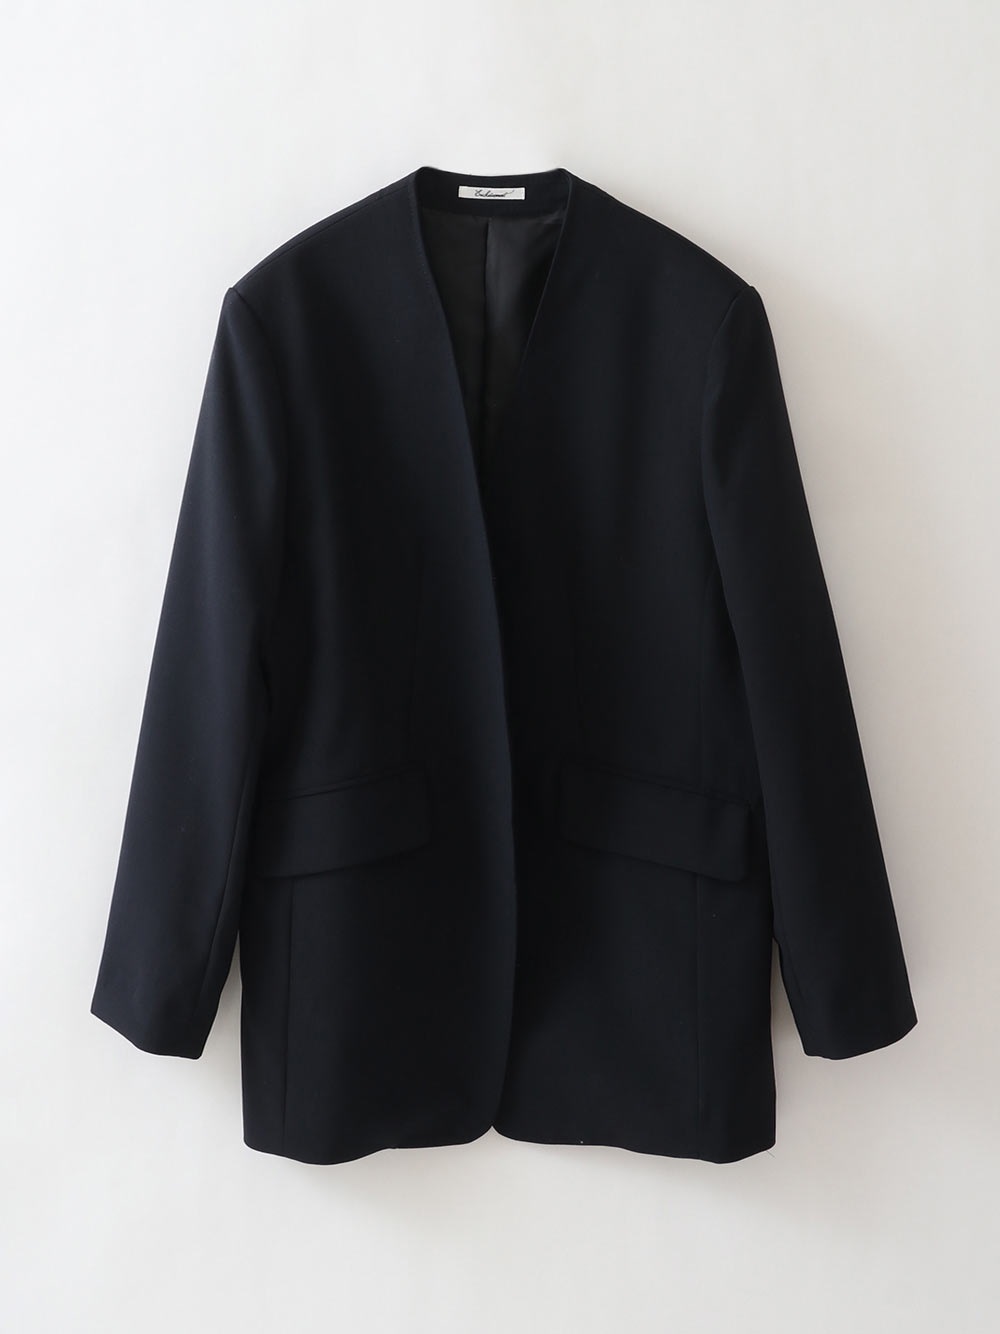 Ｔ／Ｗ ポプリンノーカラージャケット | Outer | Enchainement Online ...